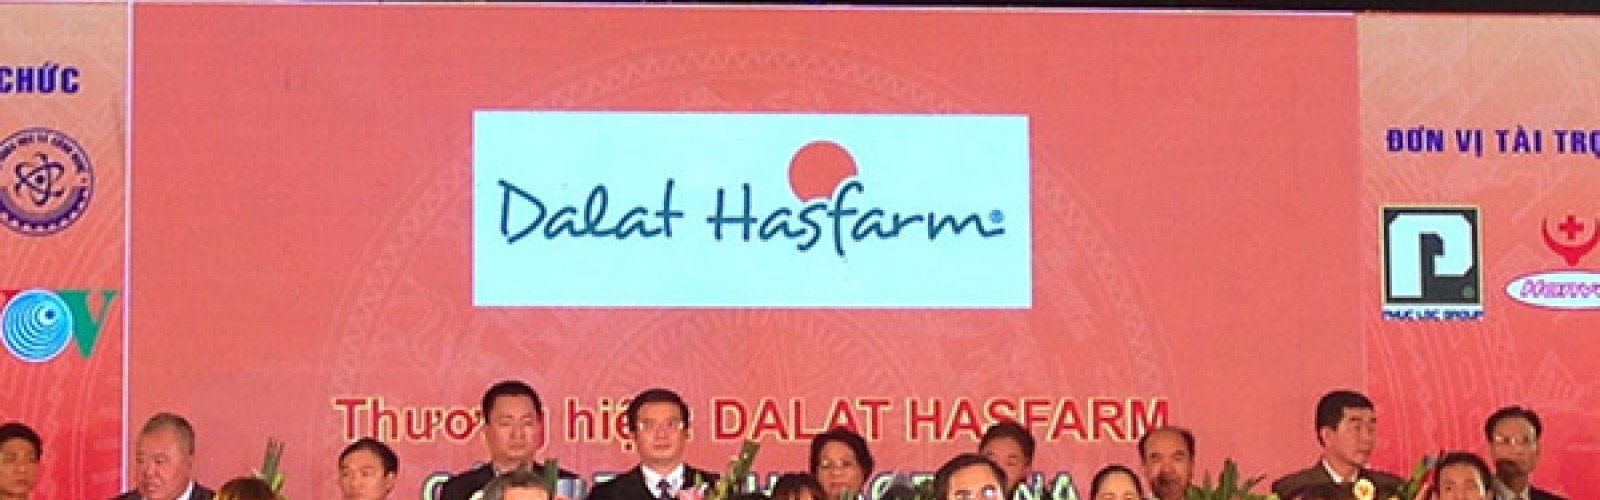 Dalat Hasfarm honored with the 2015 “100 sustainable brands in Vietnam